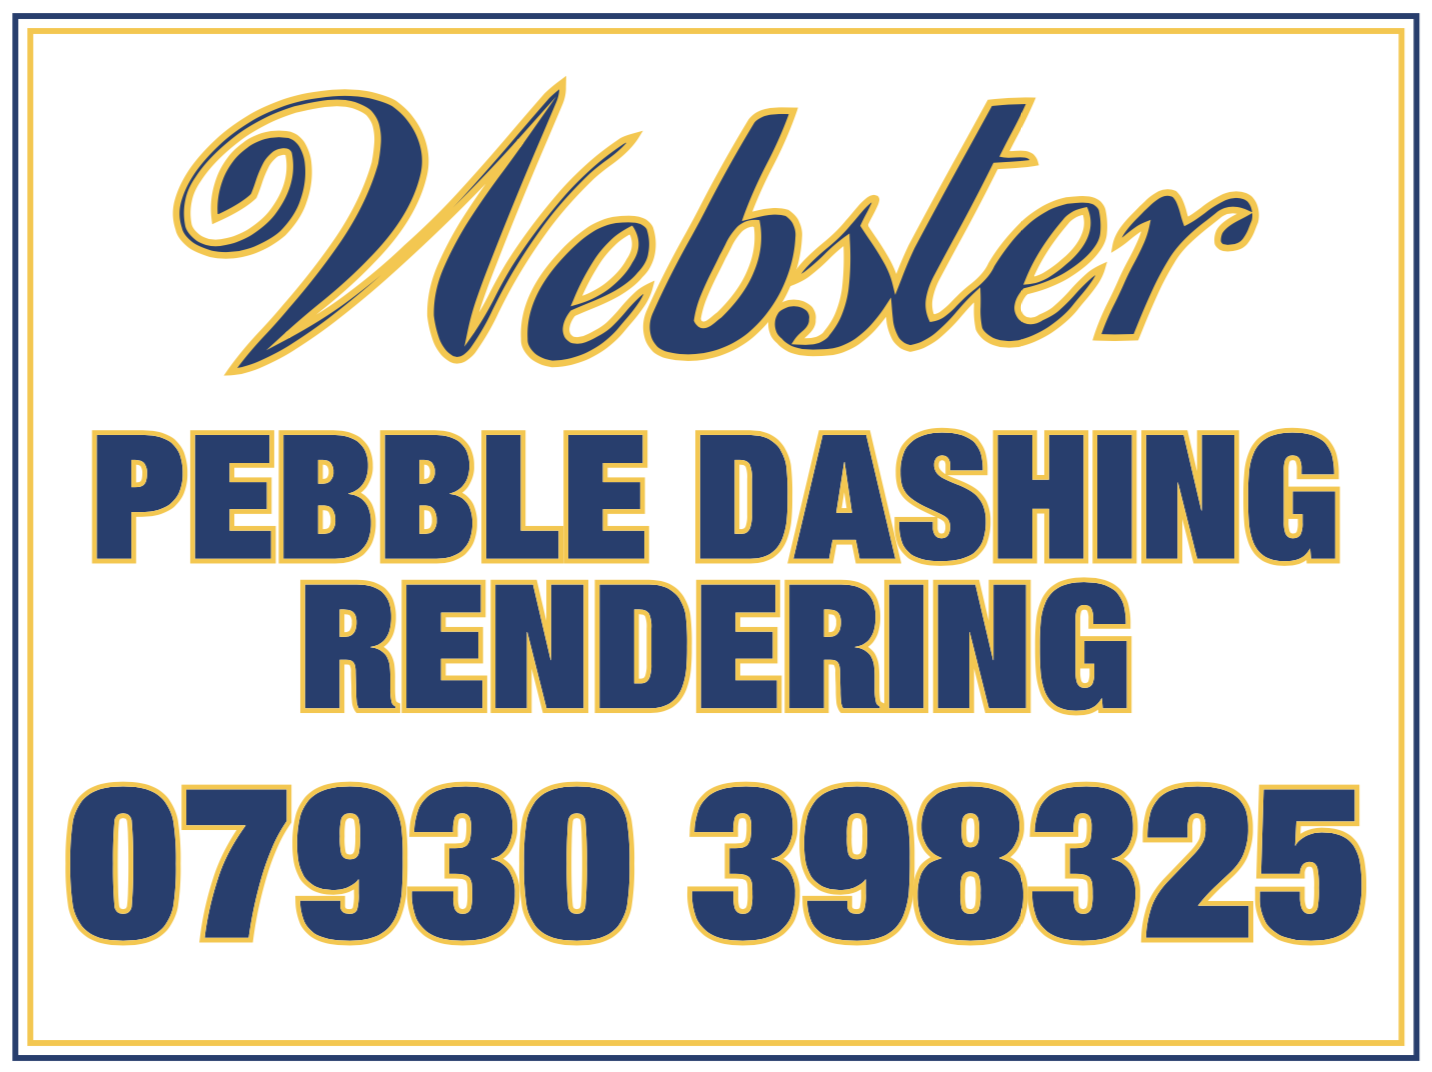 Webster pebble dashing rendering specialists